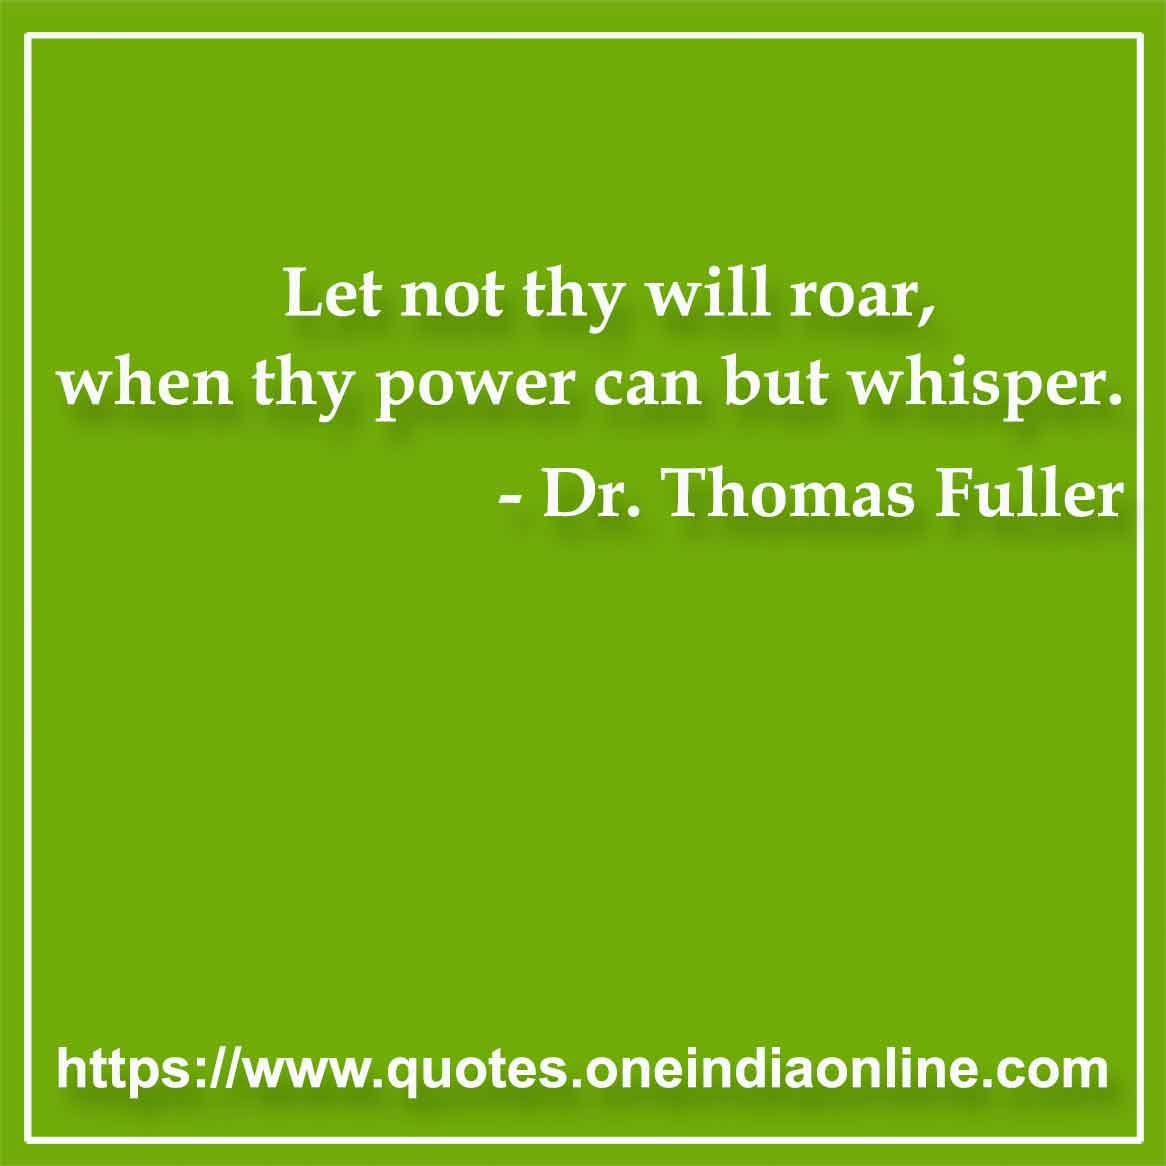 Let not thy will roar, when thy power can but whisper. 

- Power Quotes by Dr. Thomas Fuller 